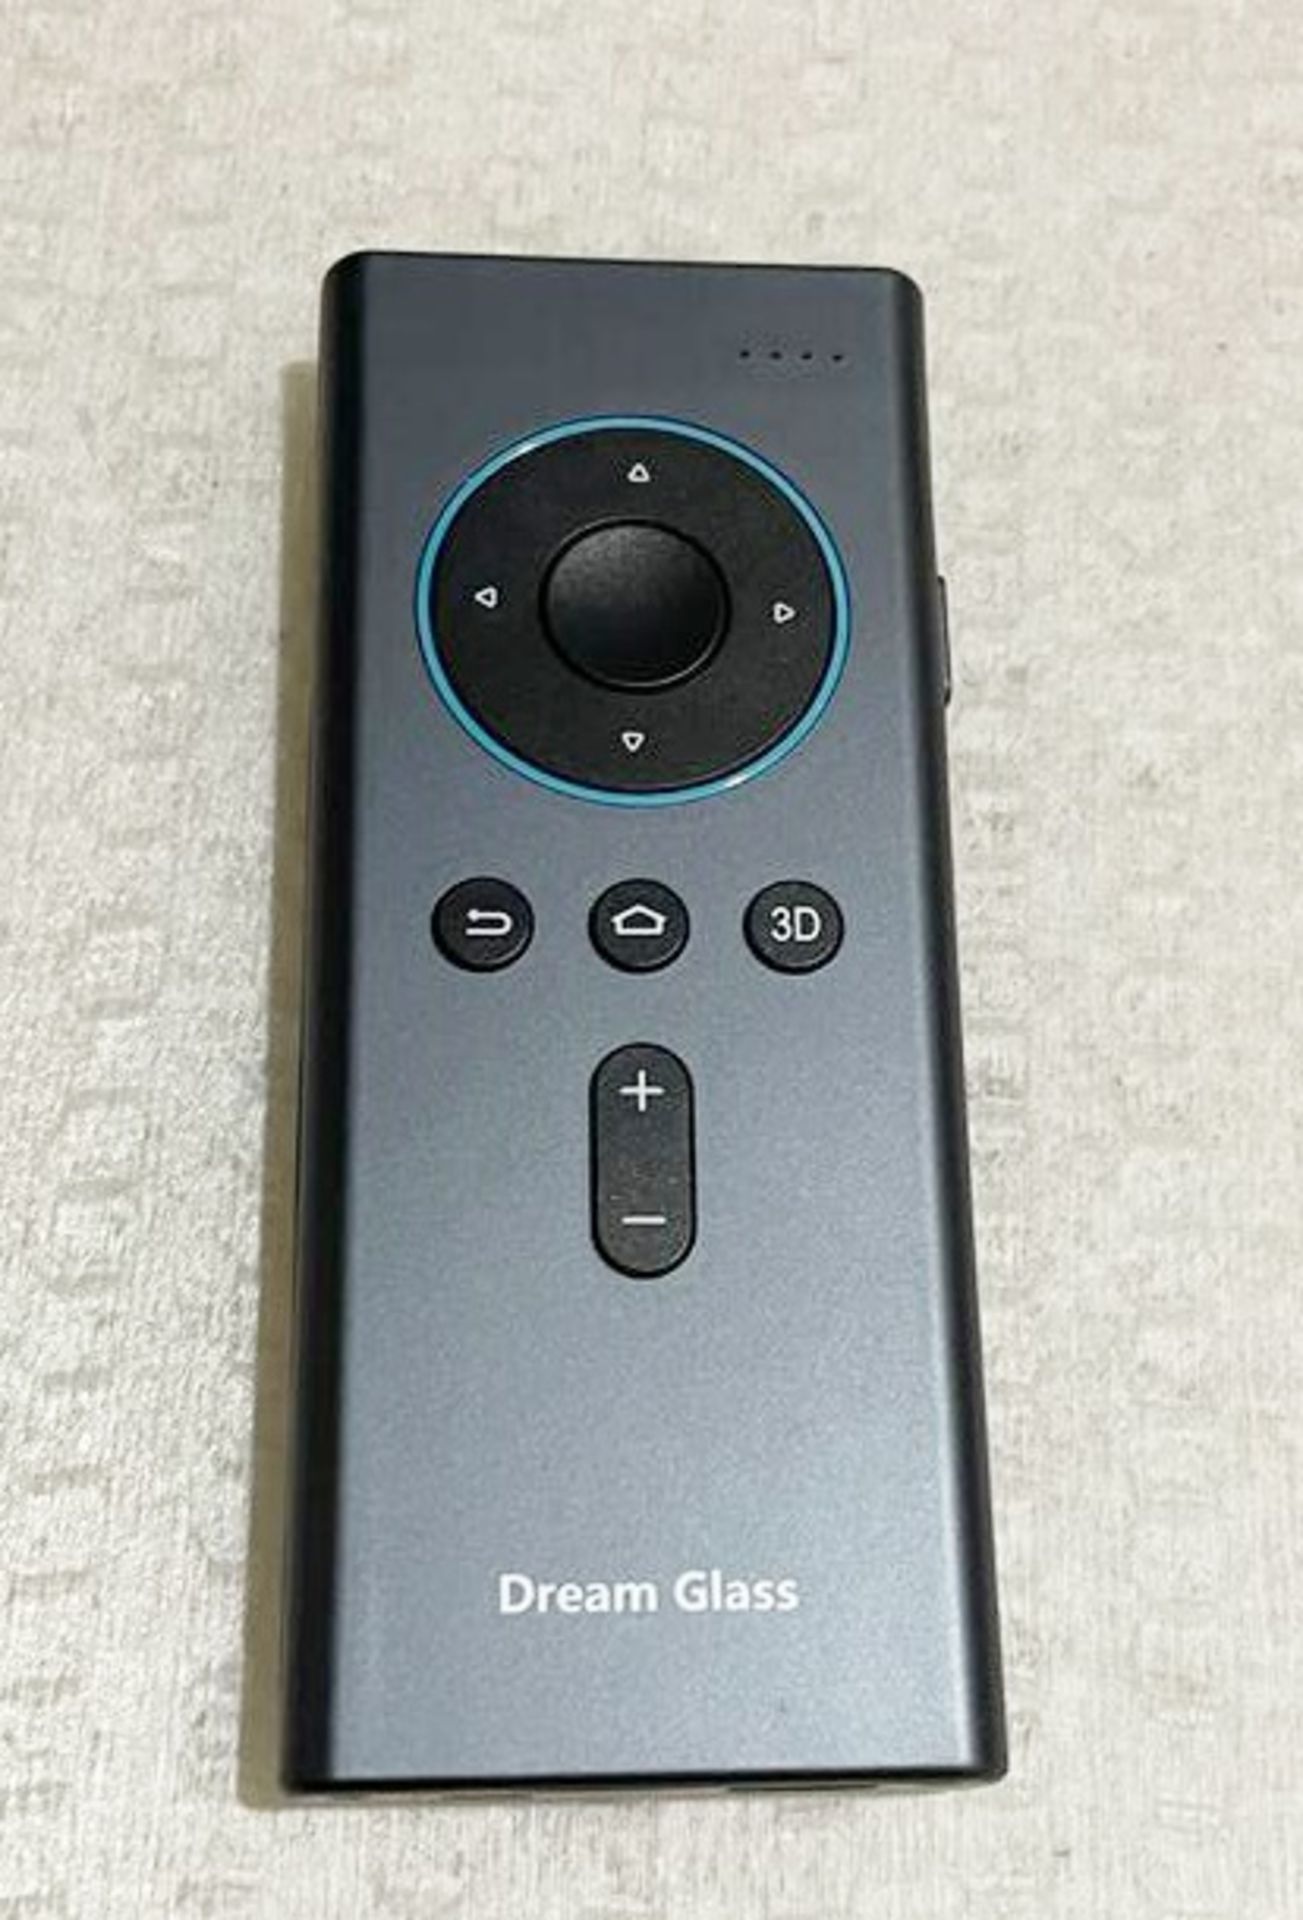 1 x Dream Glass 4k Portable And Private AR Smart Glasses - Original RRP £588.00 - CL712 - Ref: - Image 11 of 11